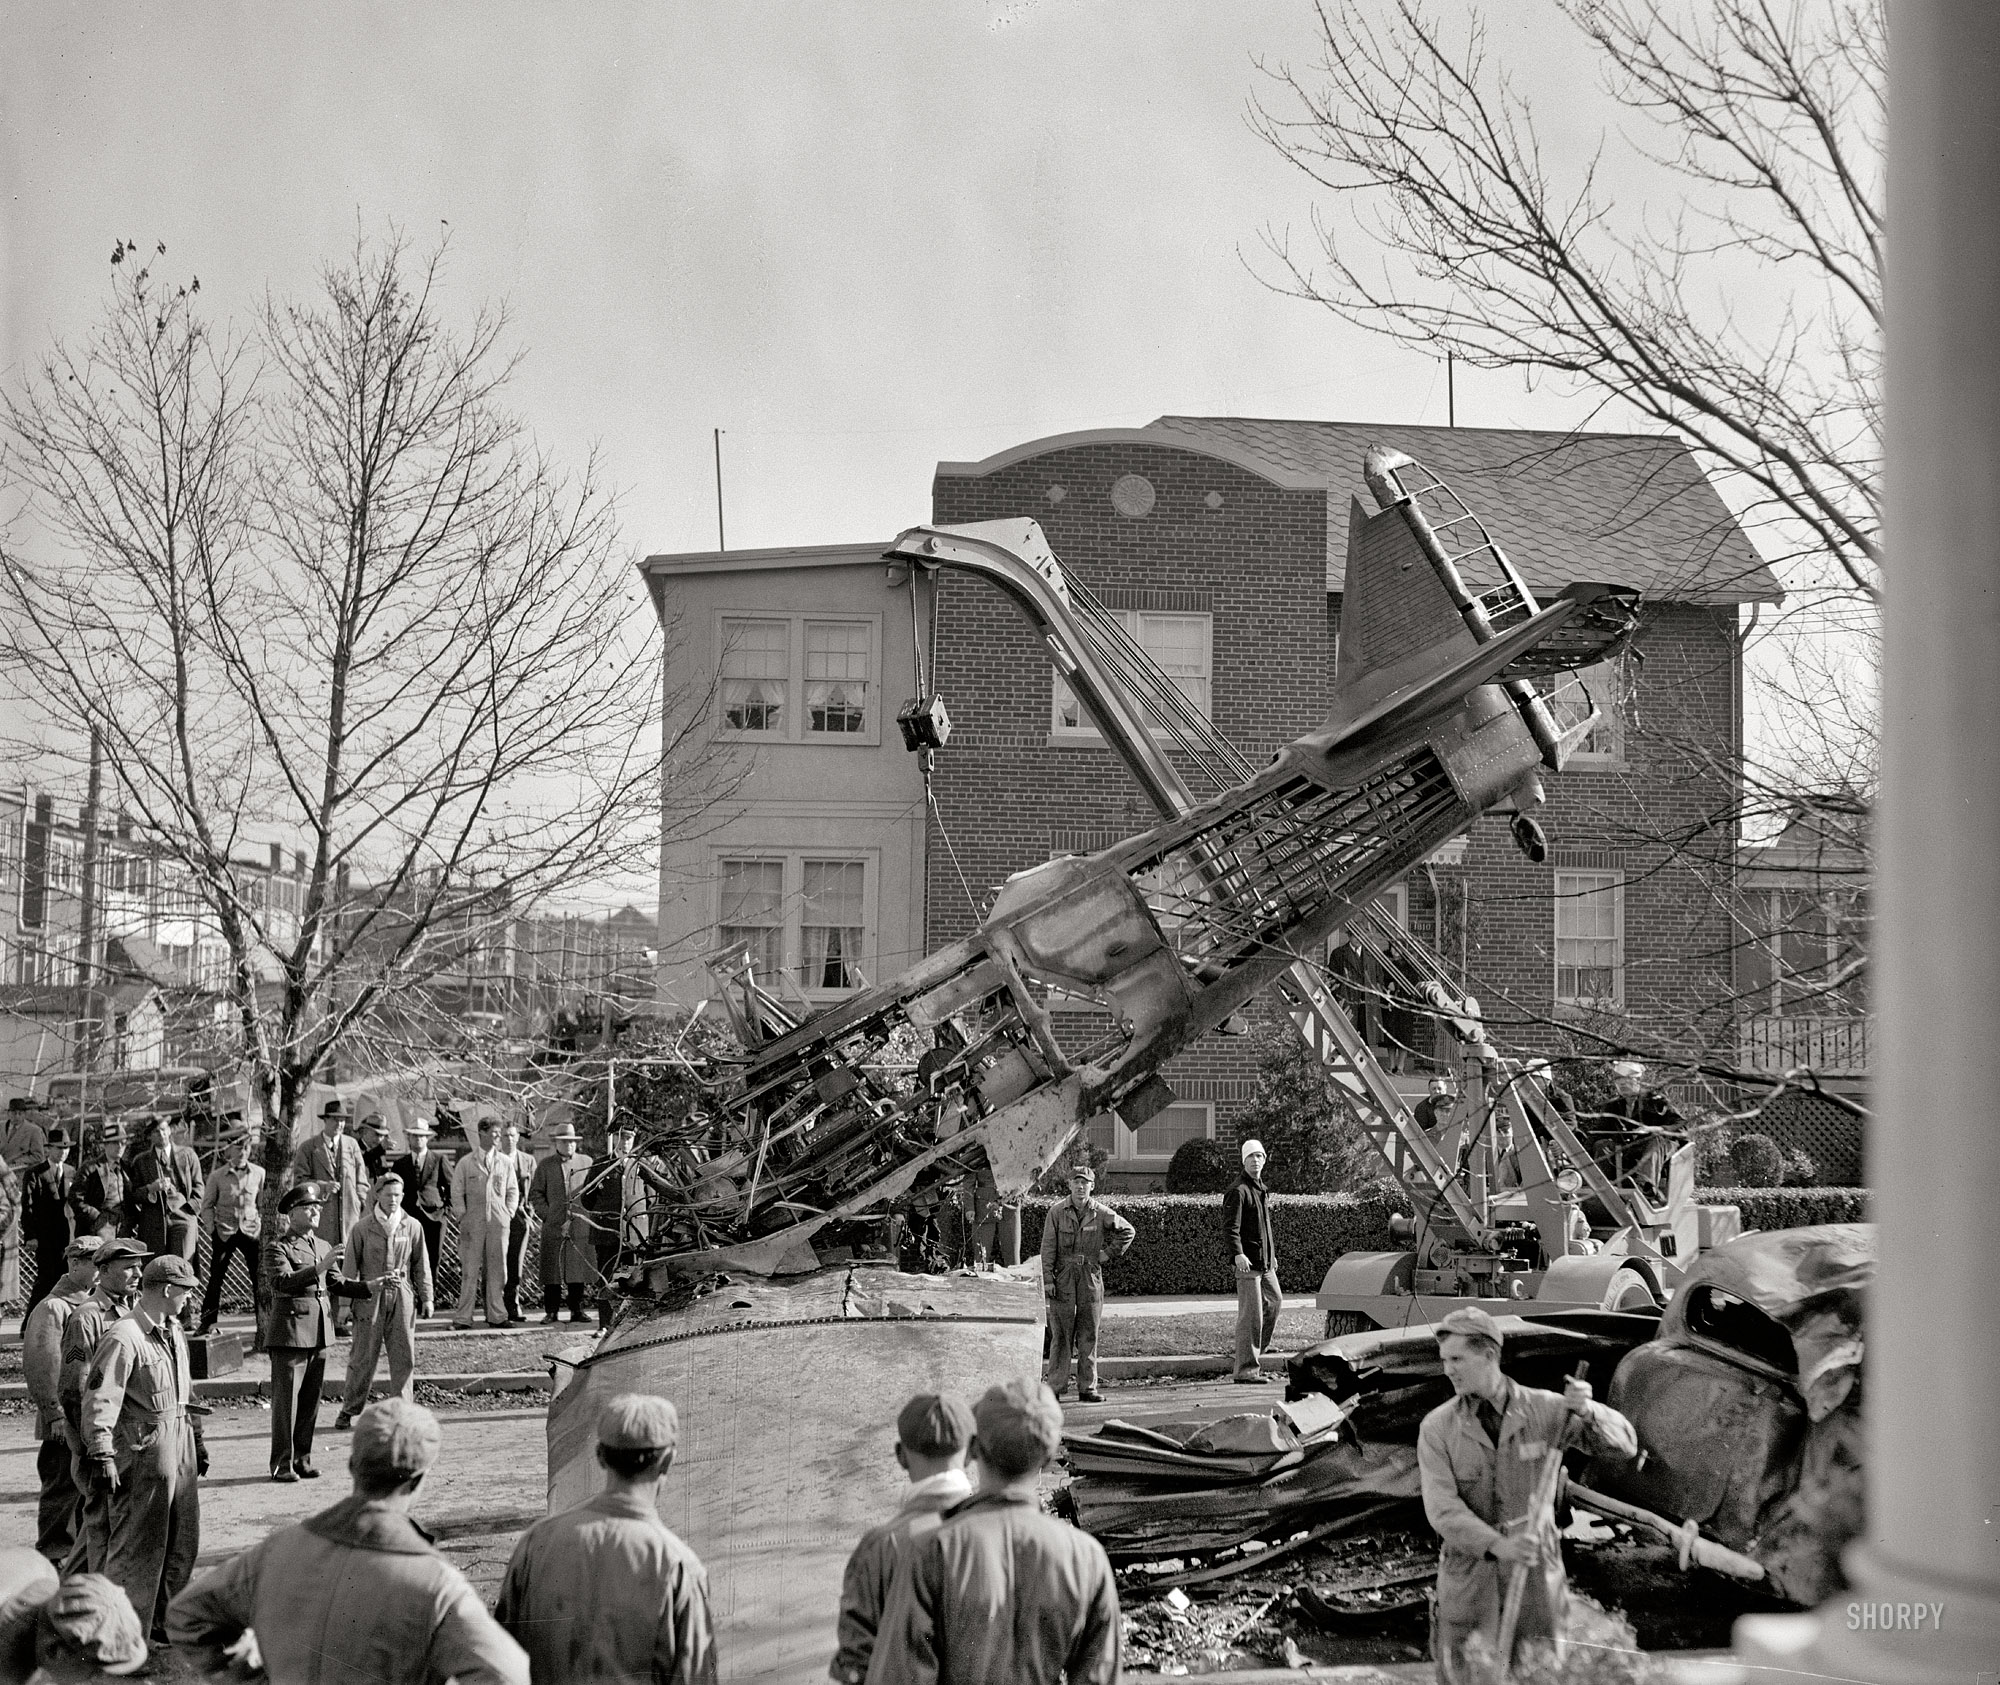 November 9, 1938. Washington, D.C. "Two U.S. Army fliers -- Lieut. Col. Leslie MacDill, General Staff Corps Officer, and Private Joseph G. Gloxner -- were burned to death today in the worst aerial tragedy in the history of the Capital when their plane crashed on a street in Anacostia, a short distance from Bolling Field. Three automobiles were wrecked in the crash. Col. MacDill was piloting the plane." Harris & Ewing Collection glass negative. View full size.